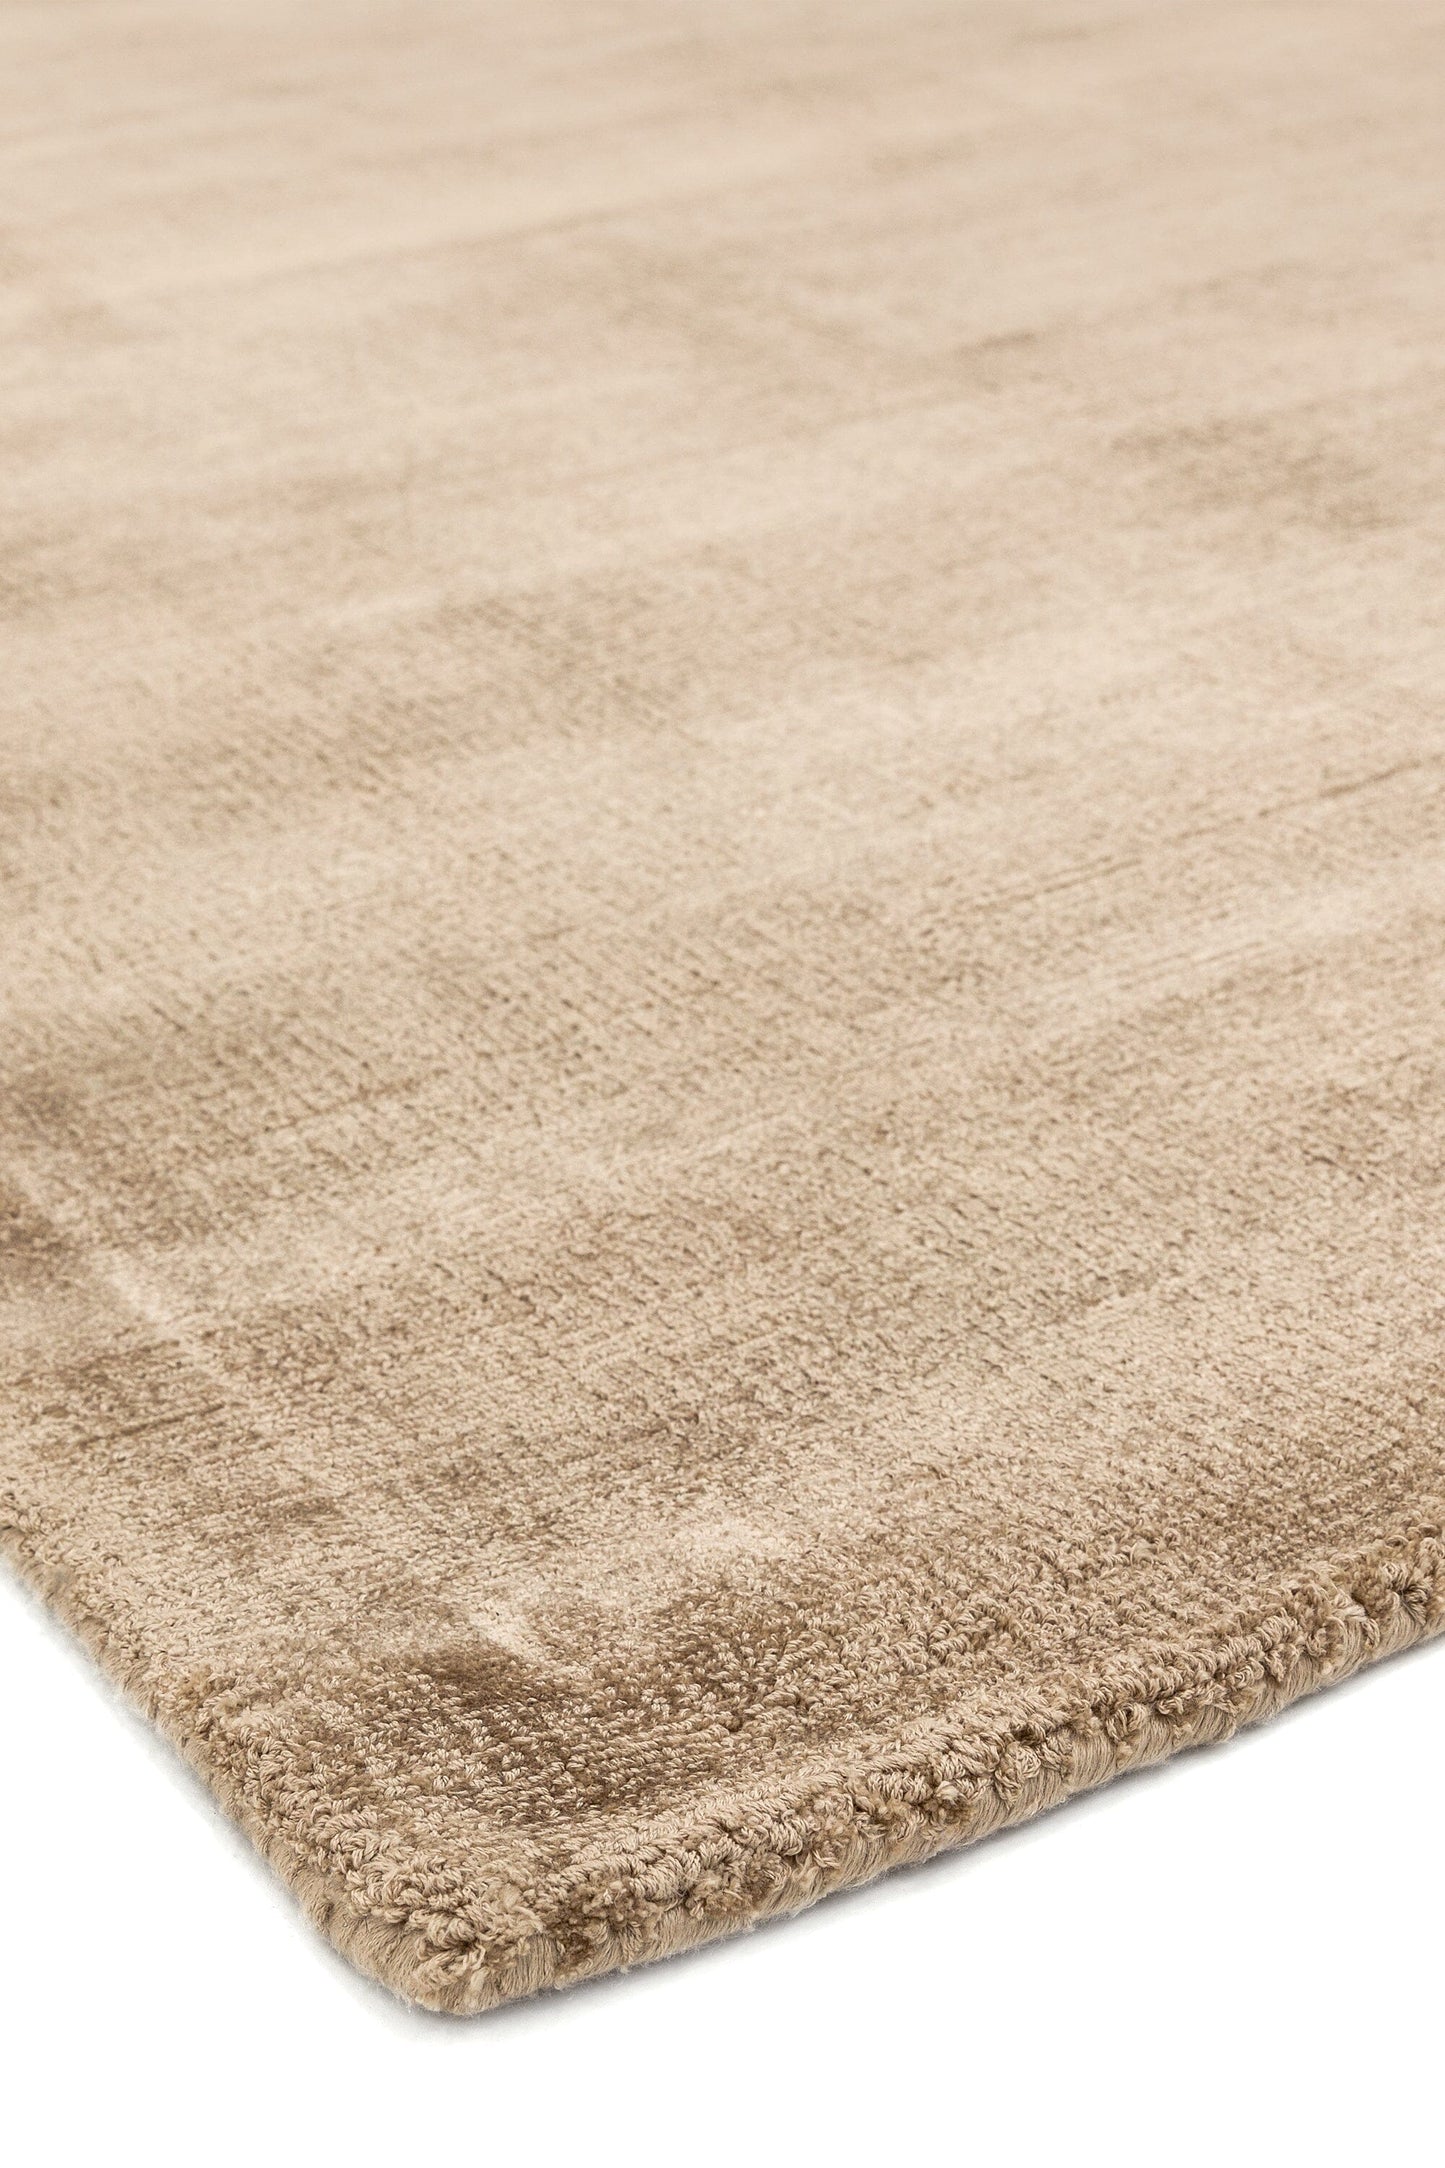 Asiatic Carpets Blade Hand Woven Rug Champagne - 120 x 170cm